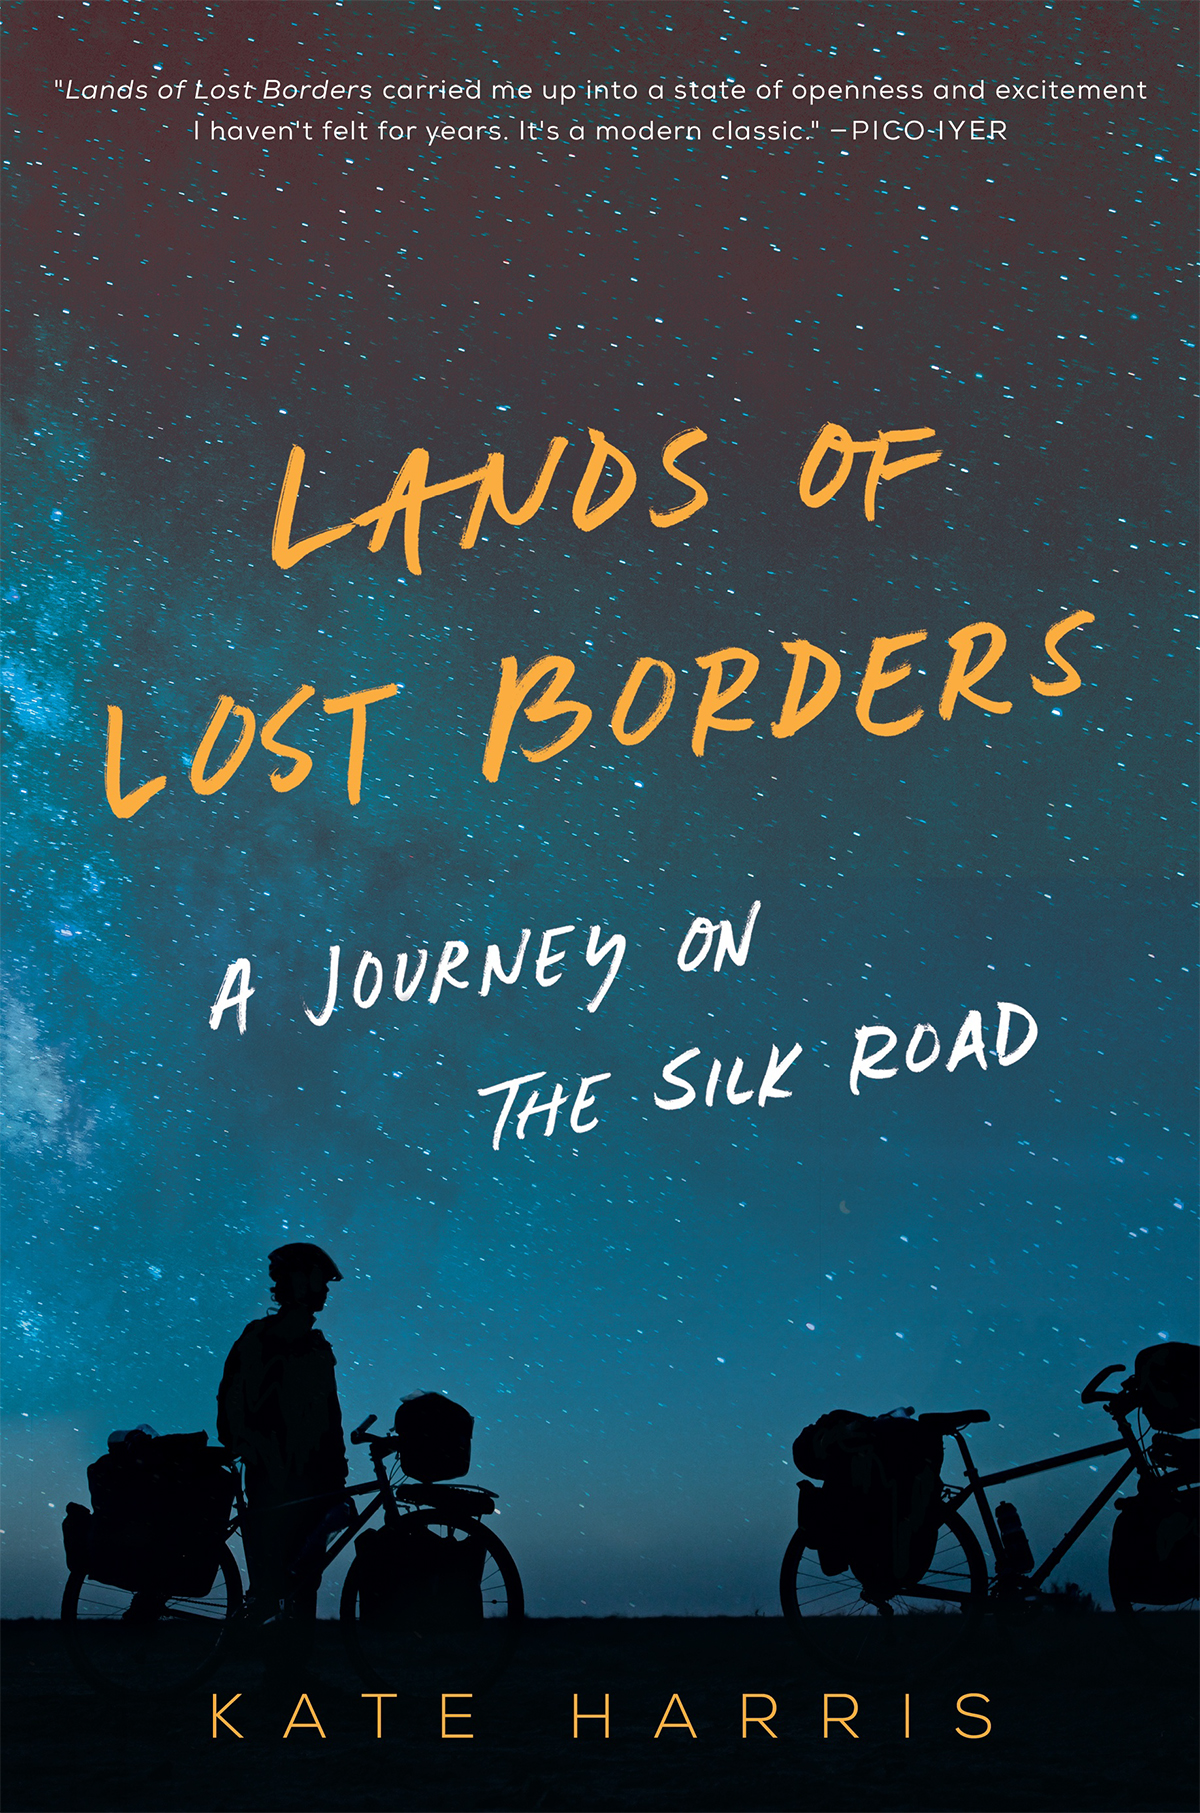 Lands of Lost Borders book cover